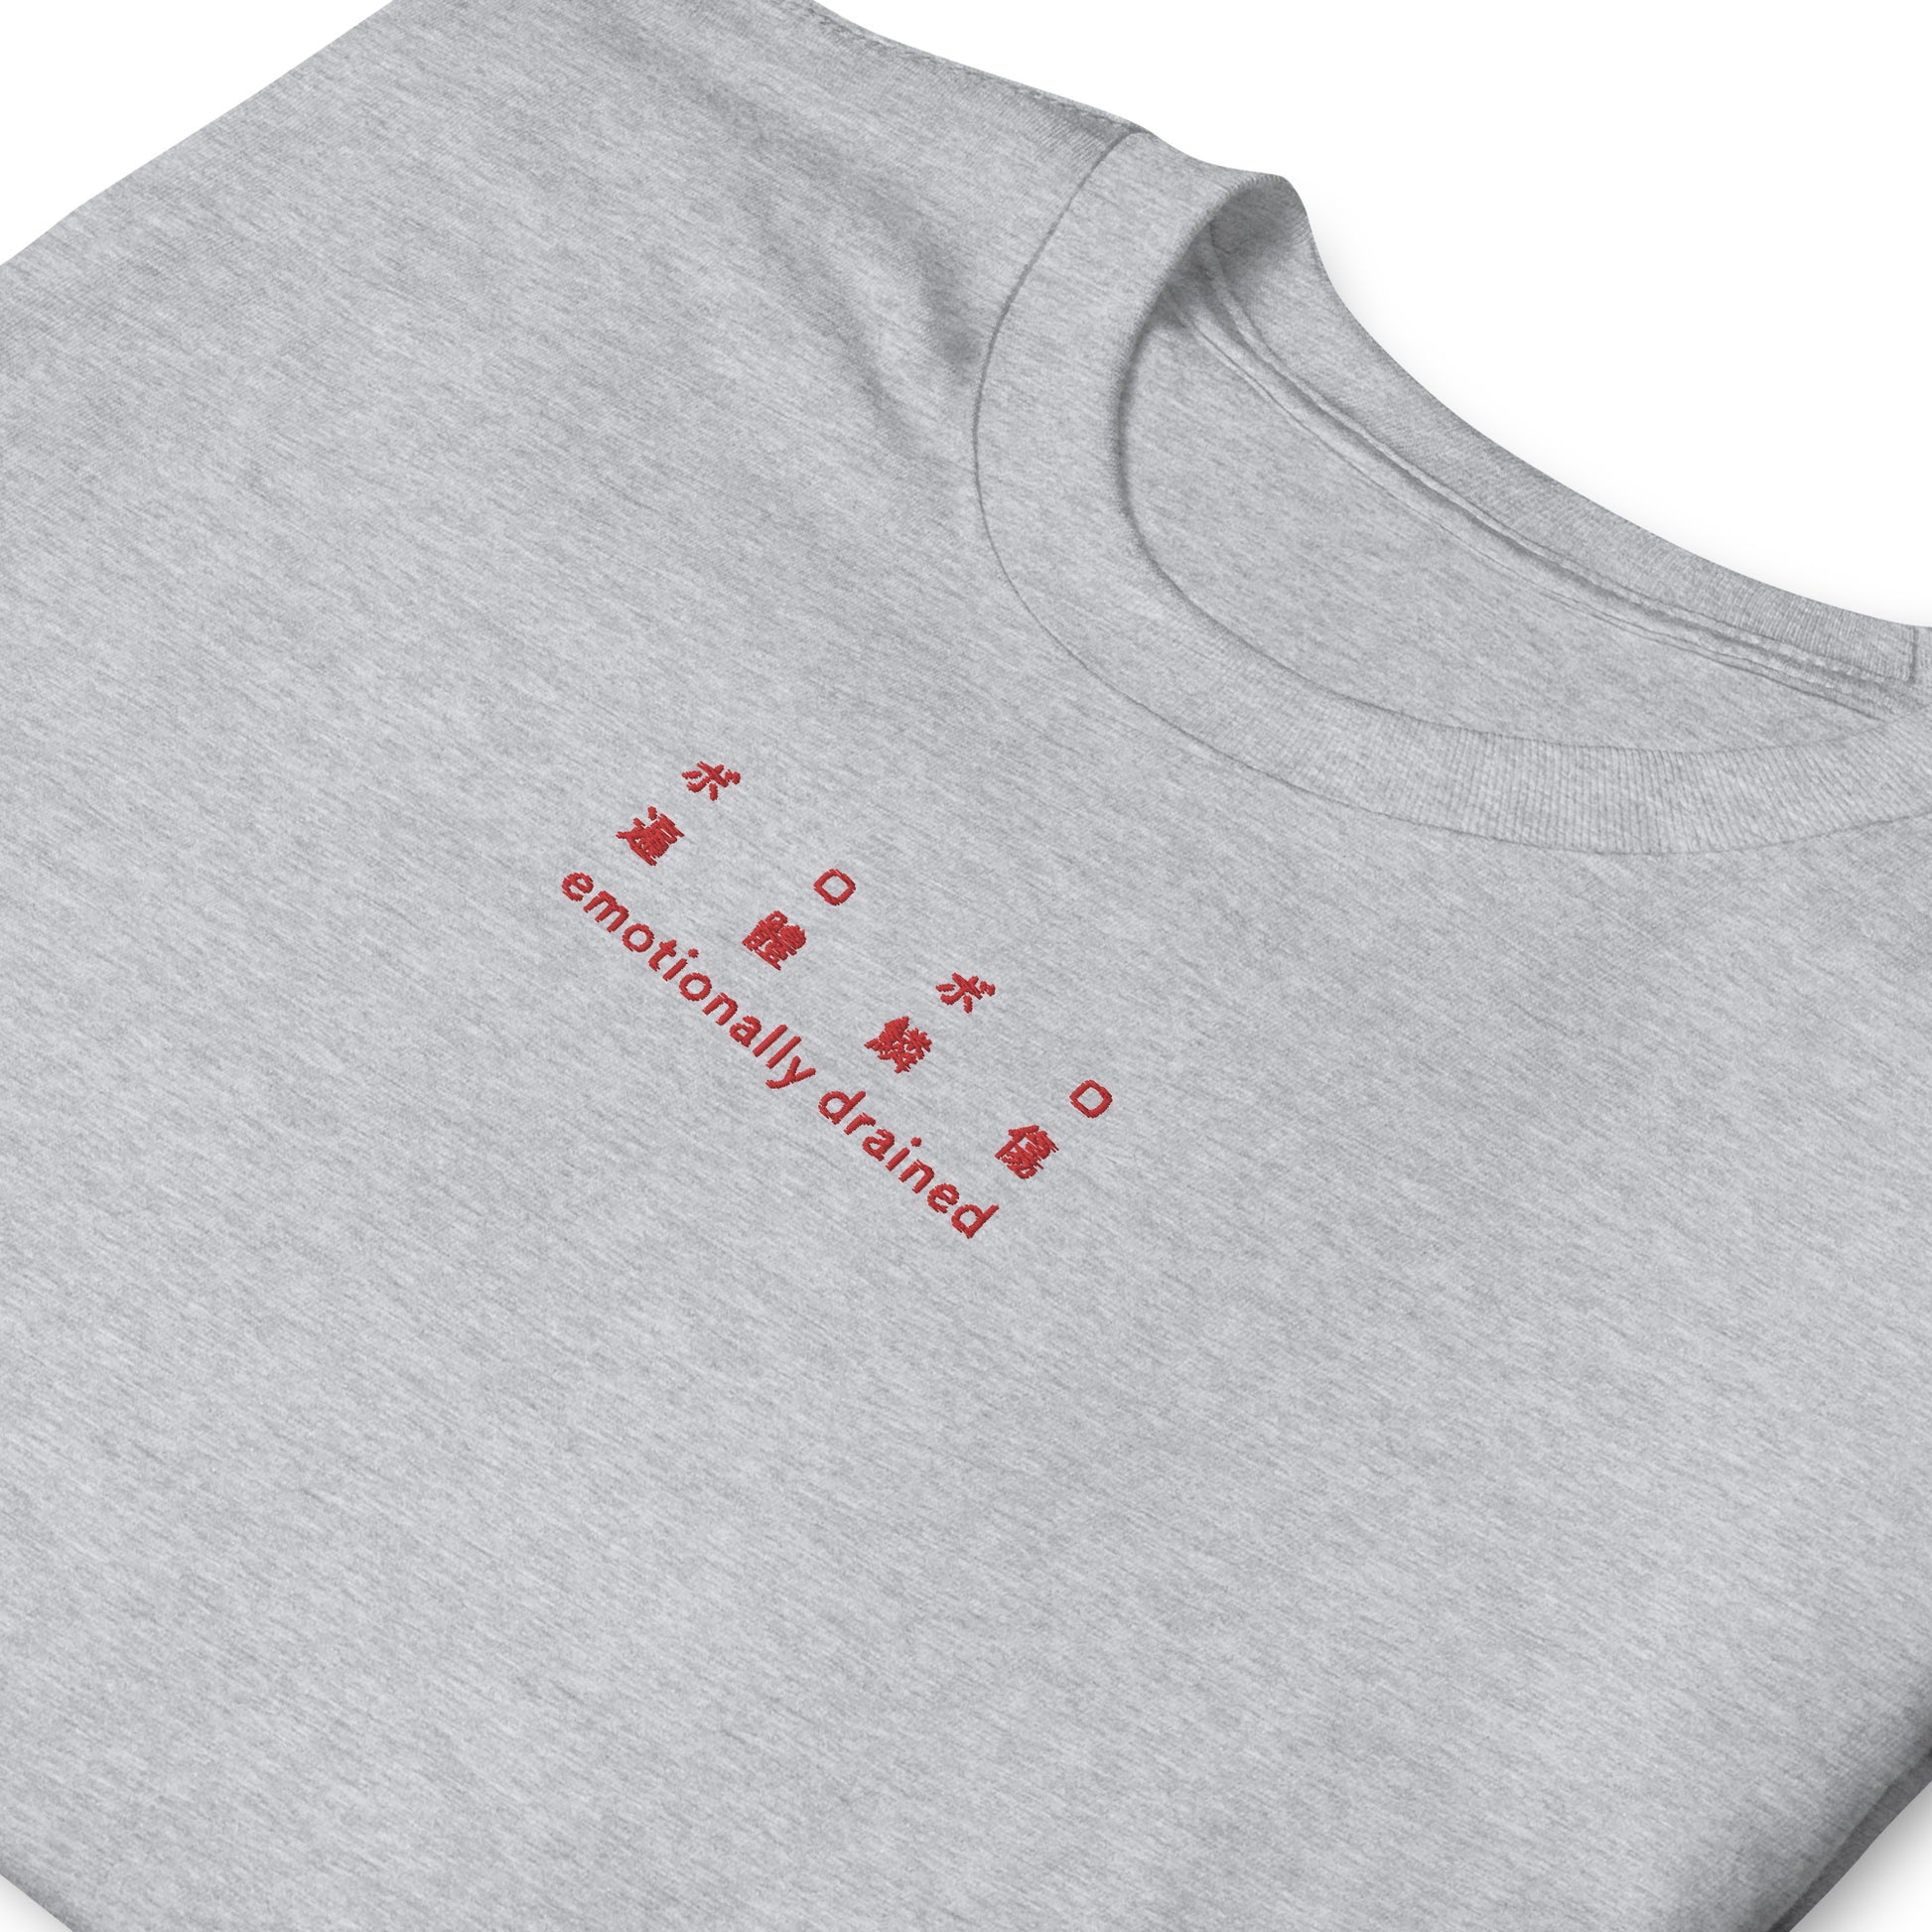 Light Gray High Quality Tee - Front Design with an Red Embroidery "emotionally drained" in three languages